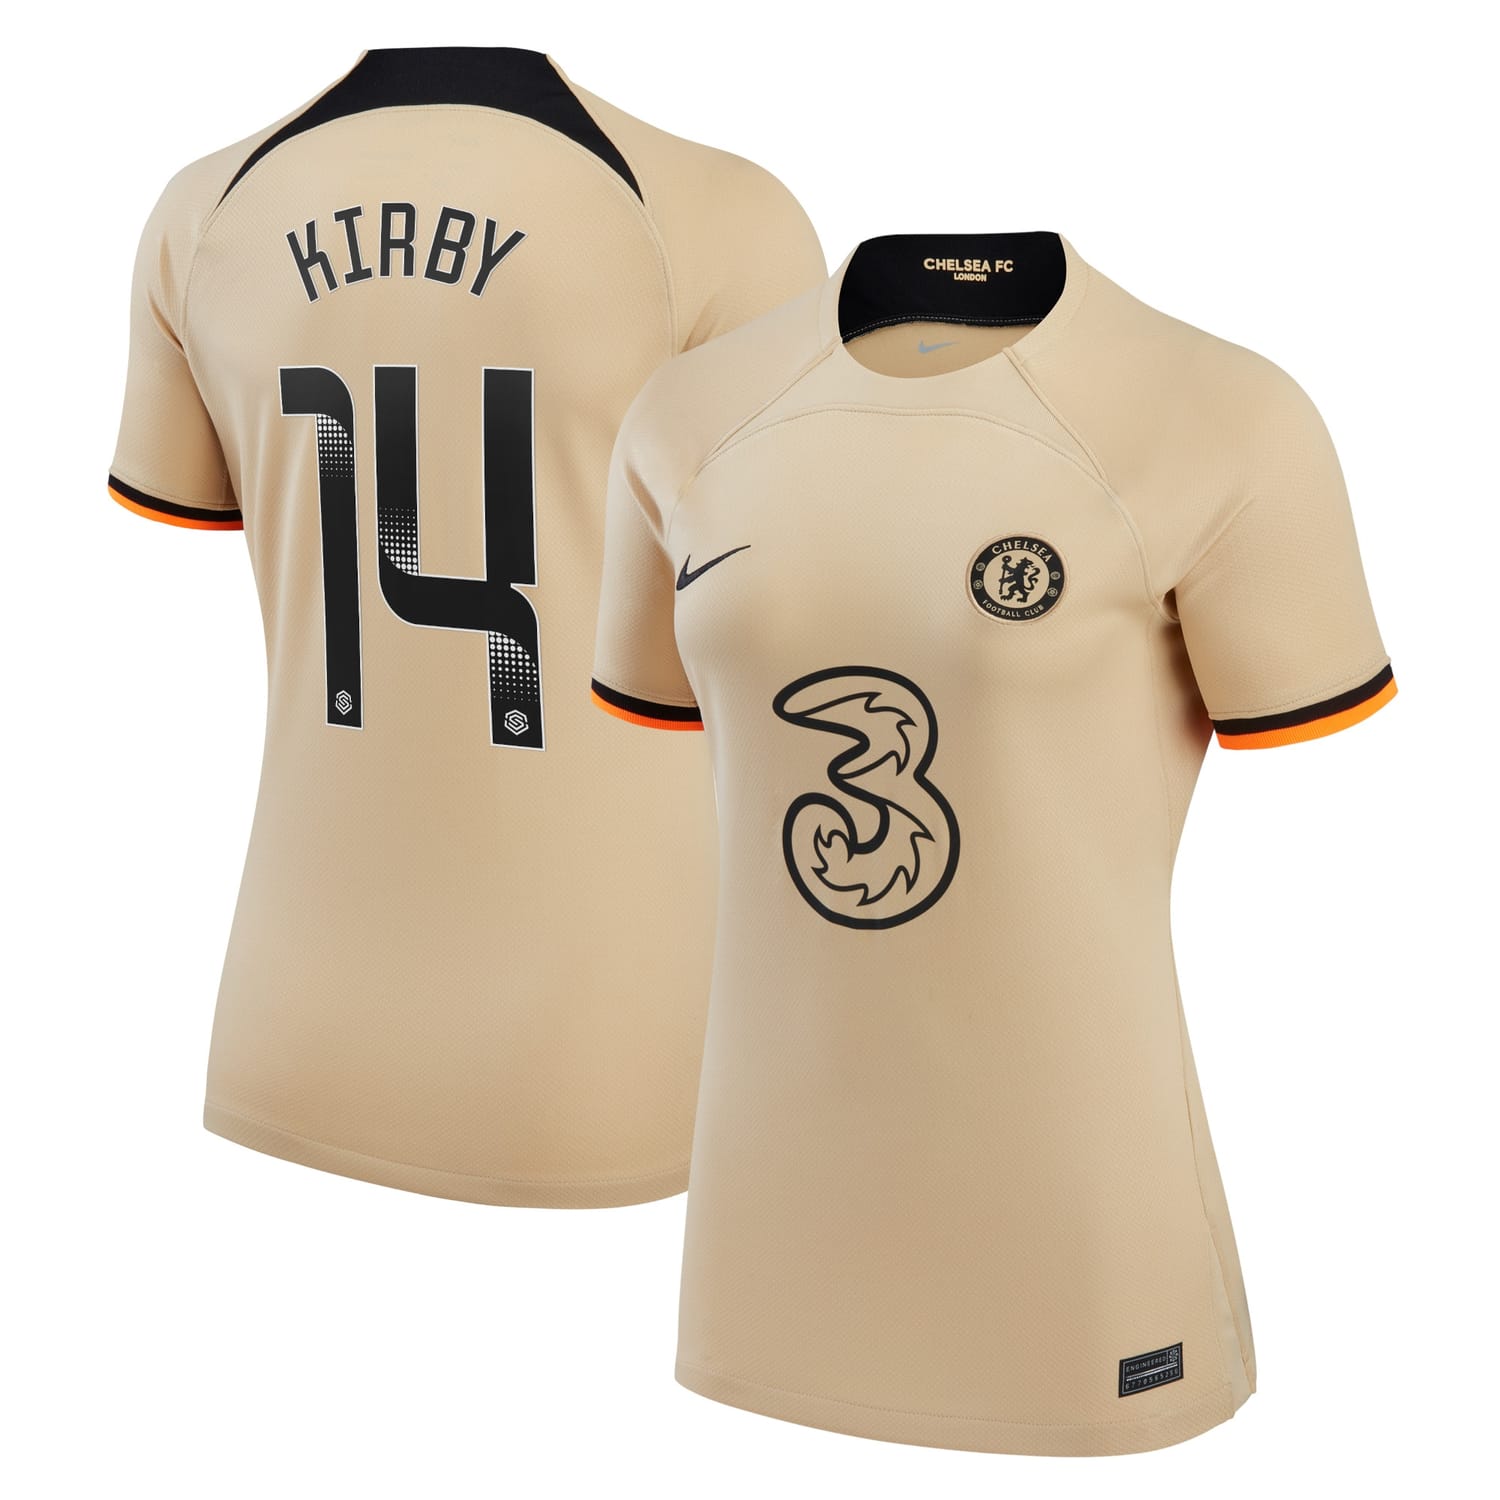 Premier League Chelsea Third WSL Jersey Shirt 2022-23 player Fran Kirby 14 printing for Women